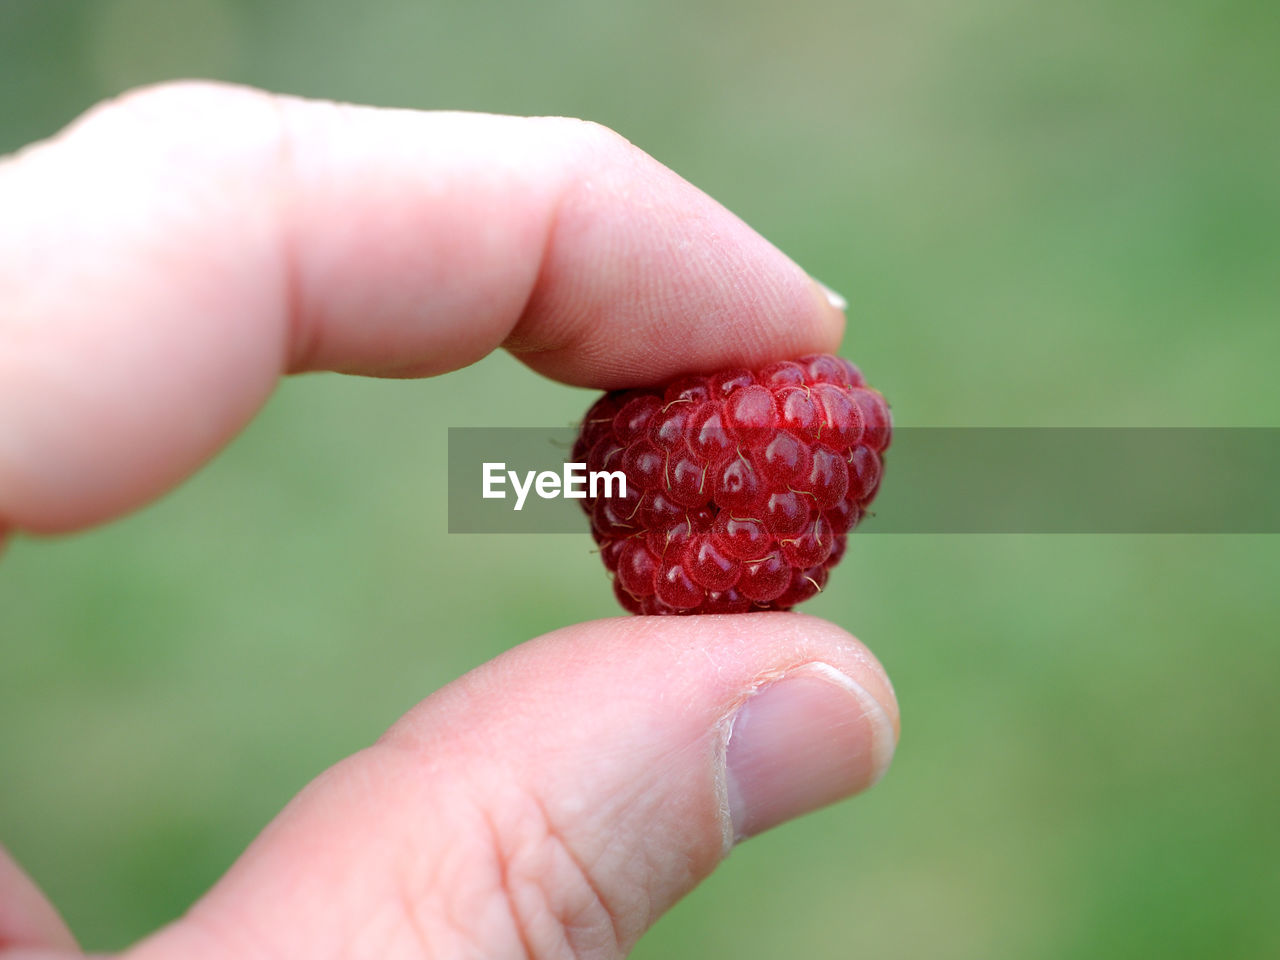 Cropped image of person holding raspberry